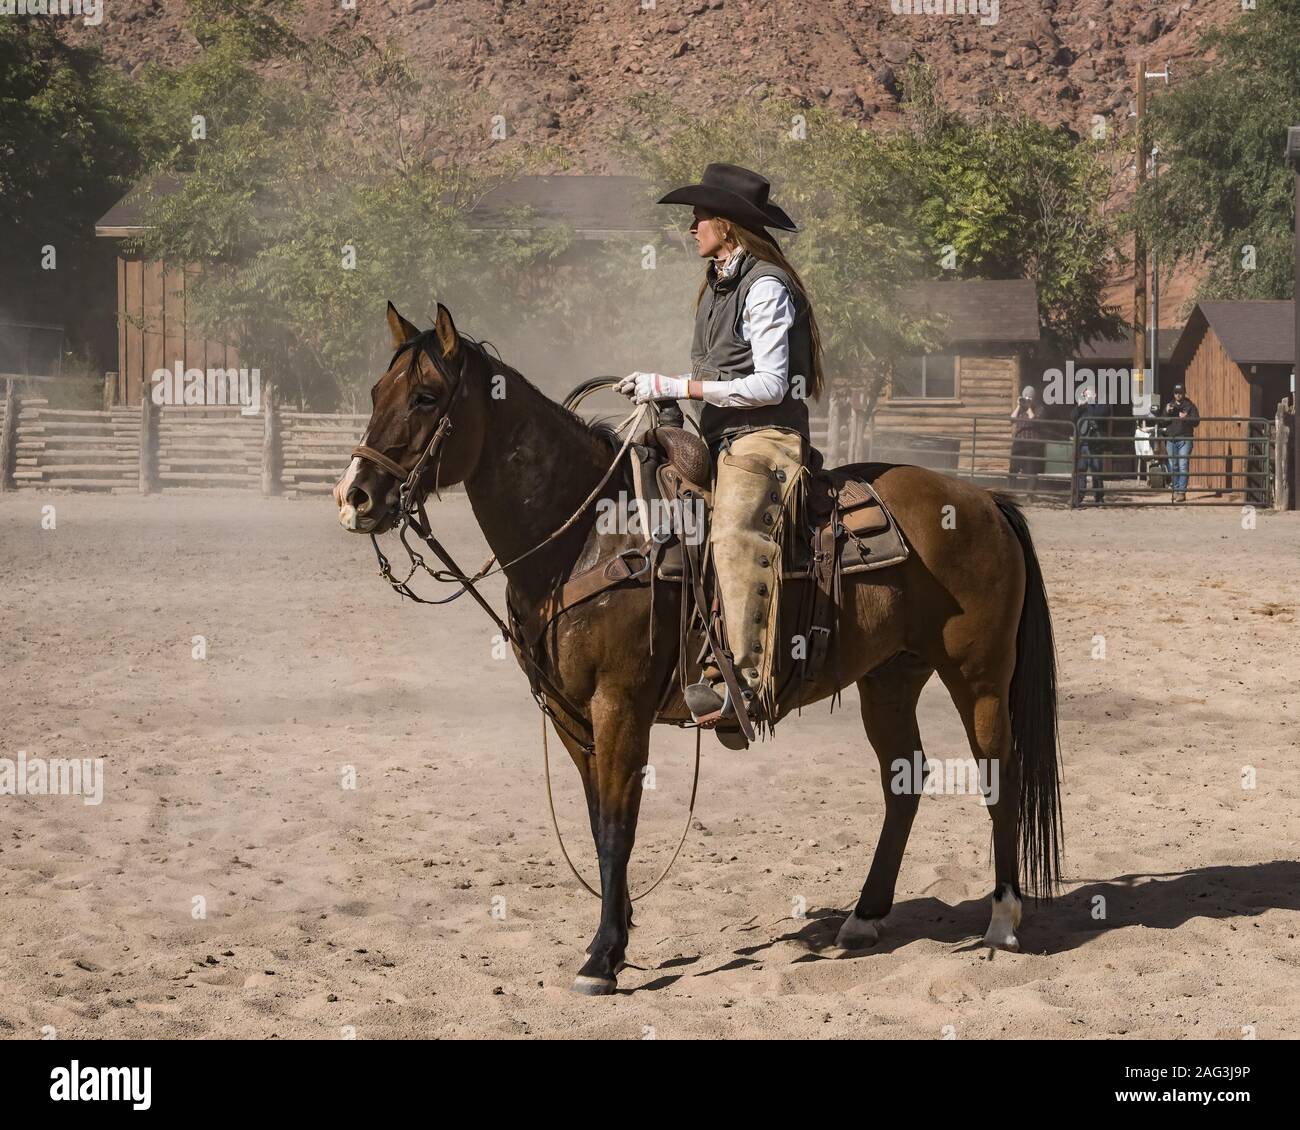 A working cowgirl wrangler on her horse in a dusty corral on a ranch near Moab, Utah.  She wears leather chaps to protect her from thorny brush while Stock Photo